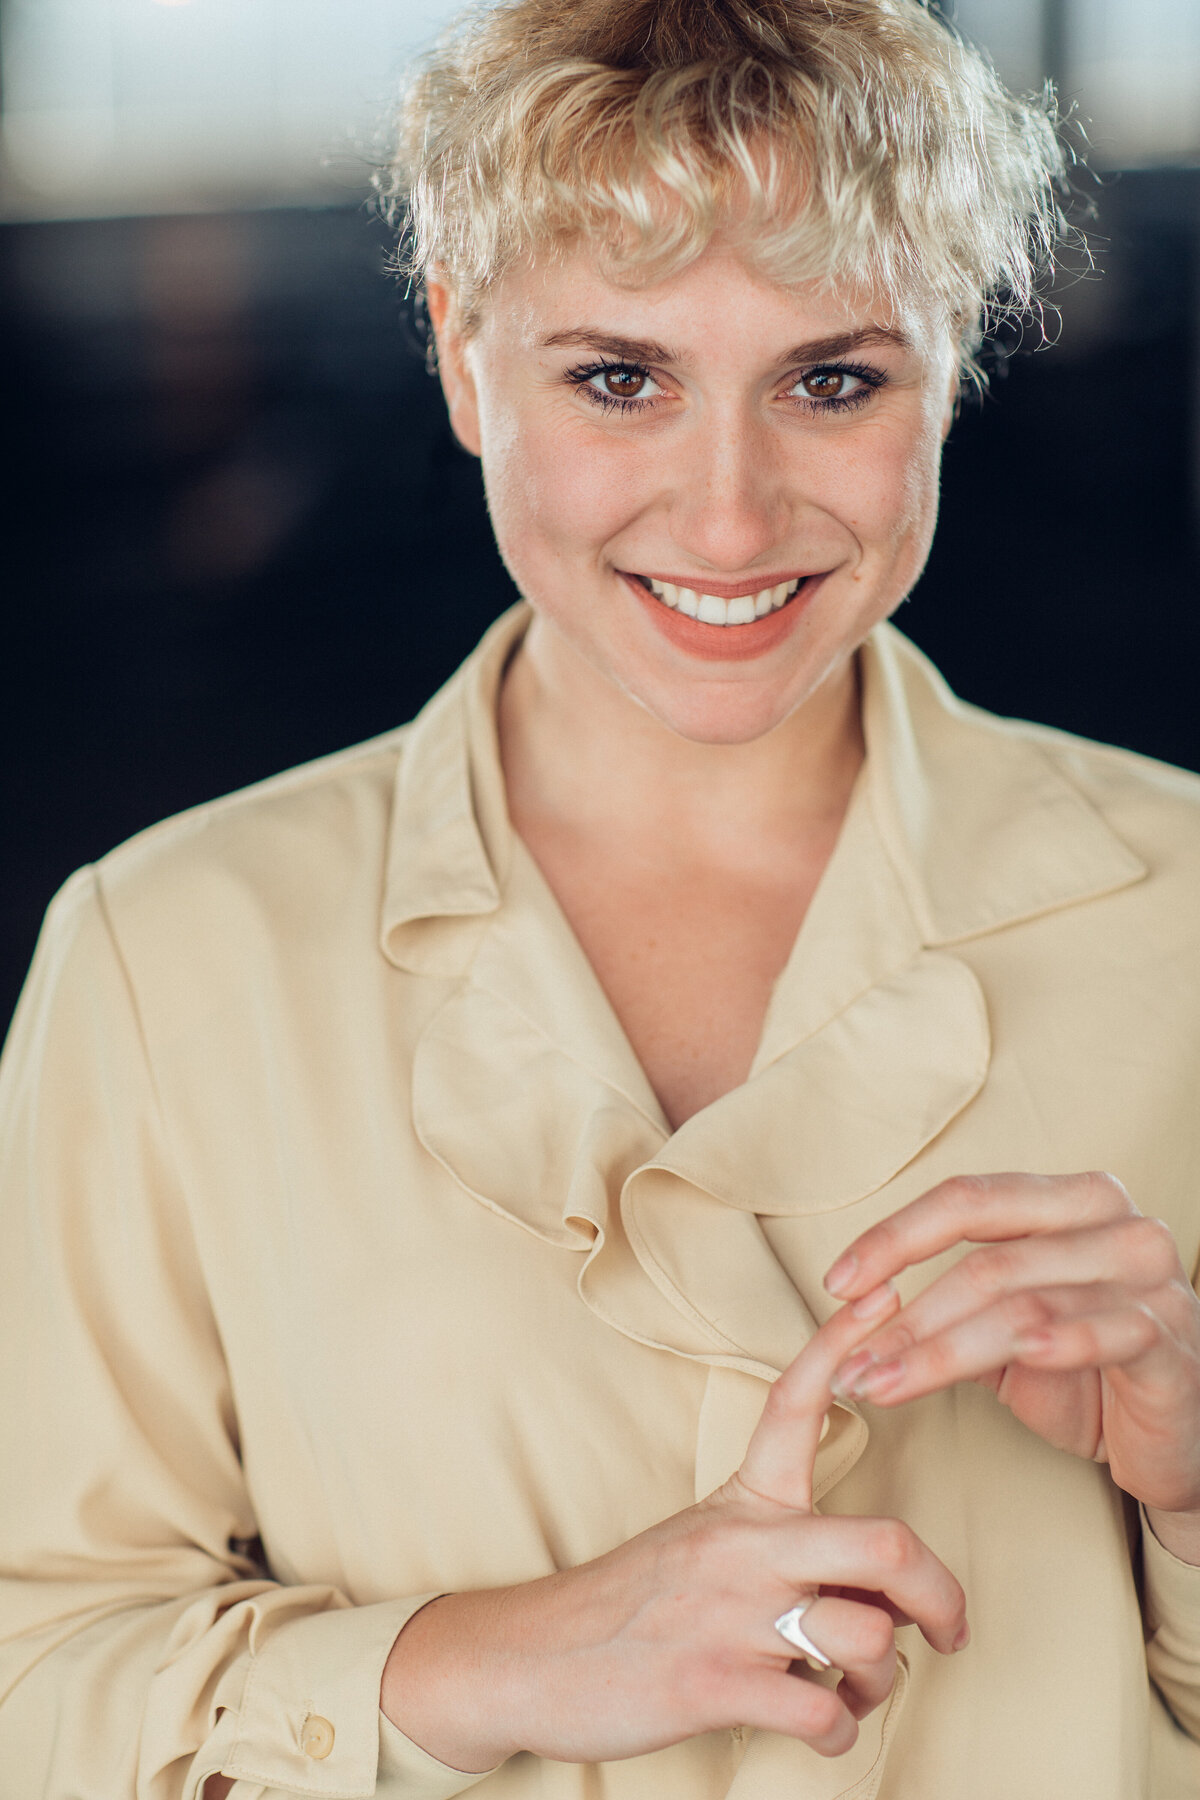 Headshot Photograph Of Young Woman In Cream Blouse Los Angeles